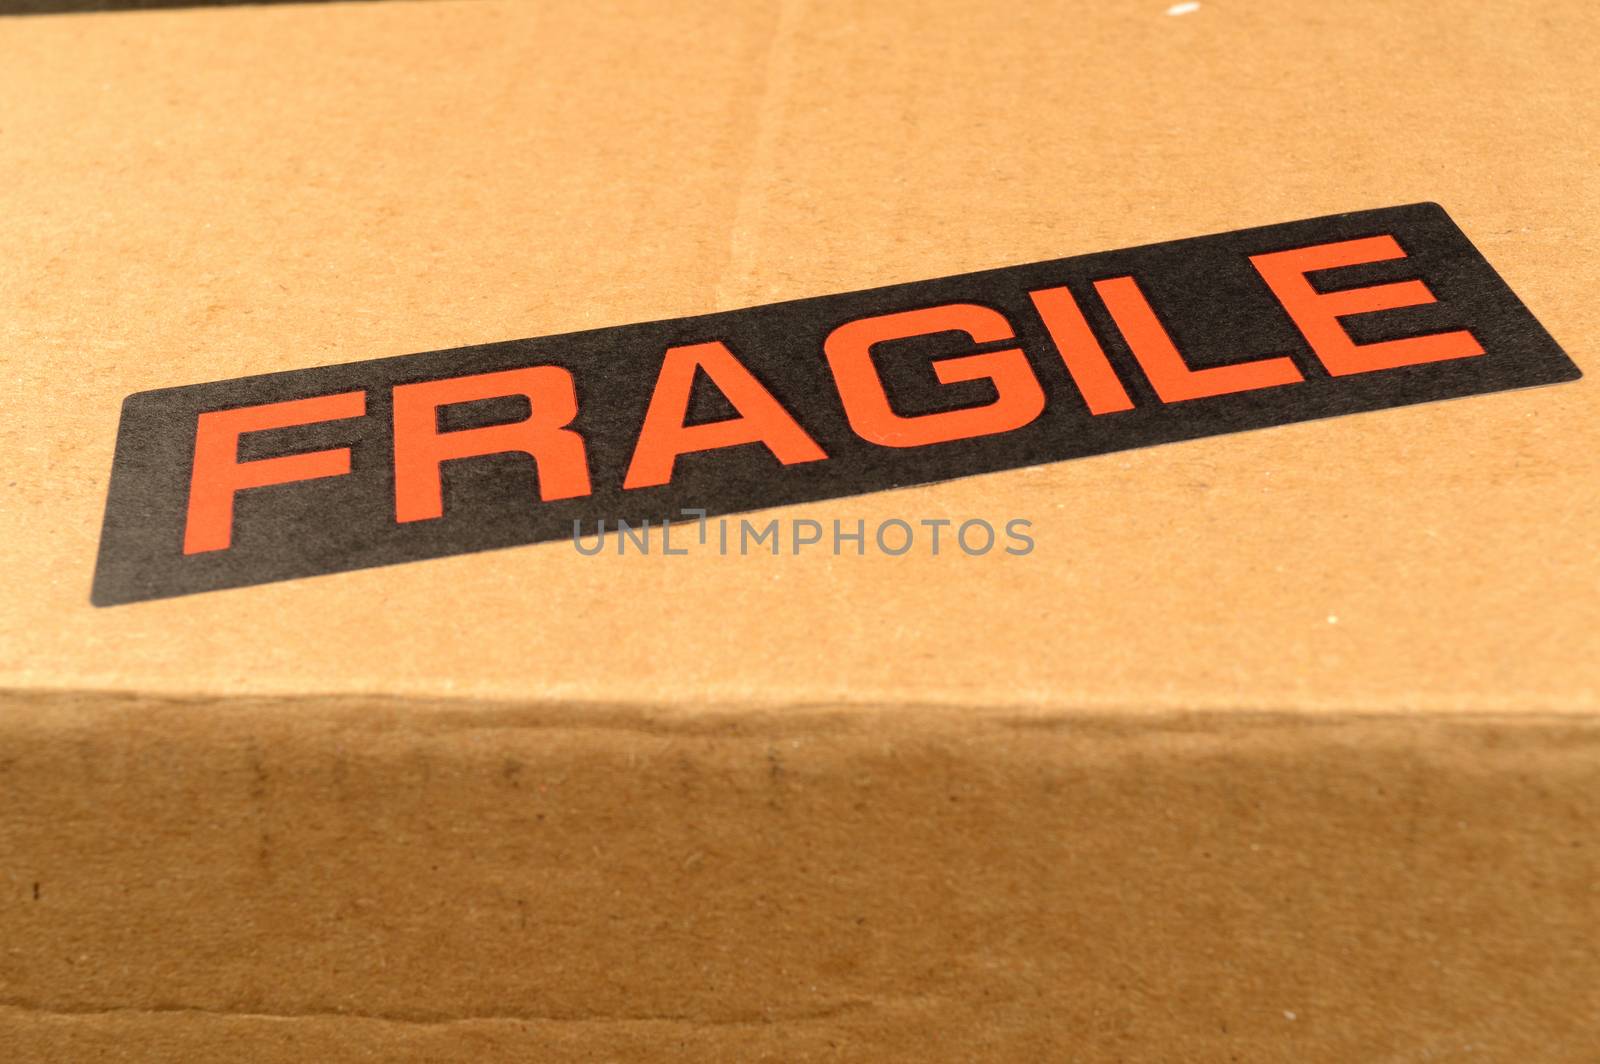 A closeup view of a fragile shipping label on a box exterior.